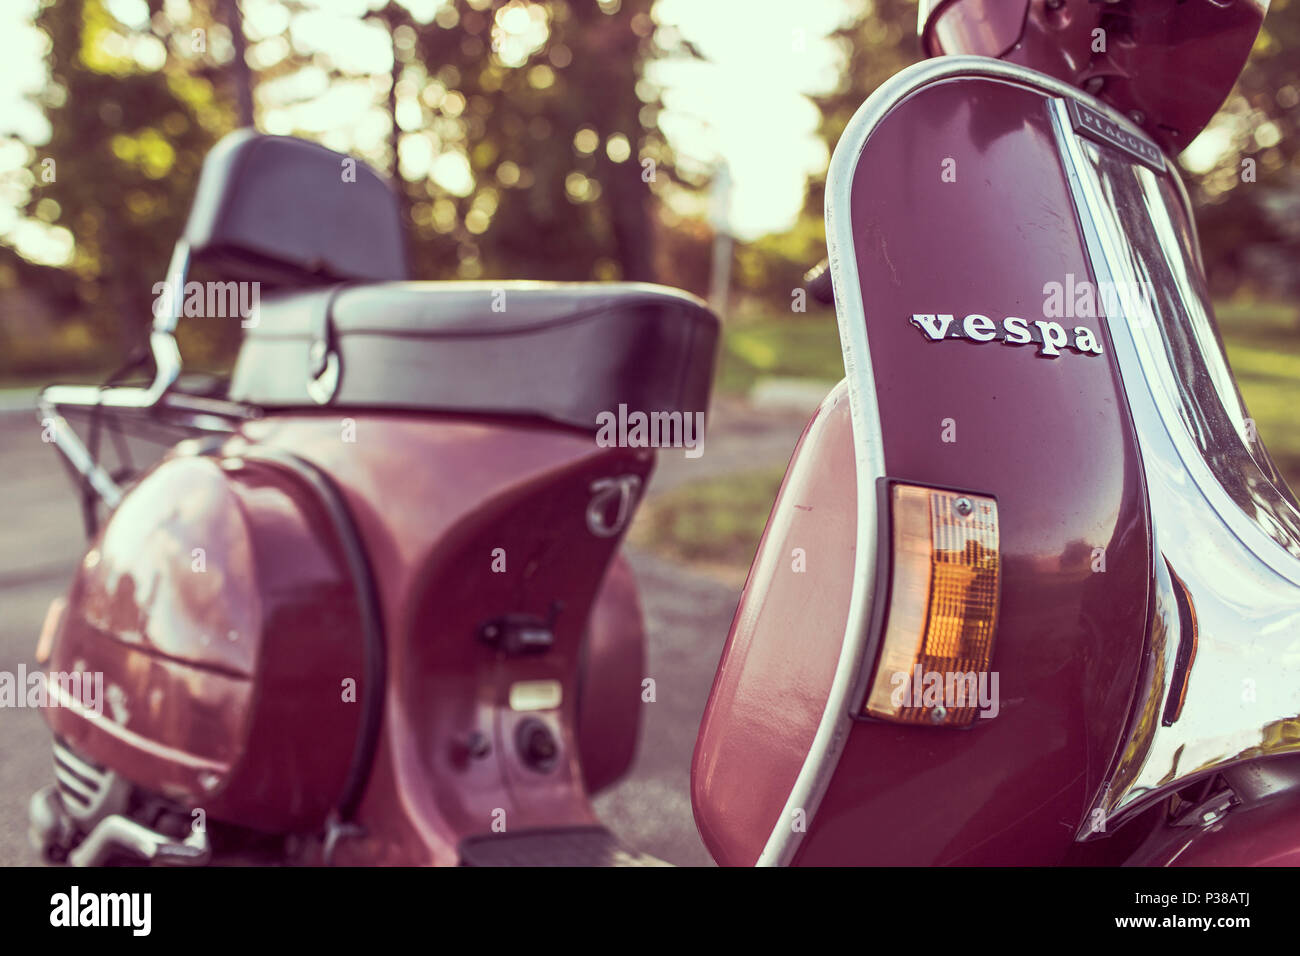 Vespa scooter moped in the afternoon so eyecatching just love this sight Stock Photo